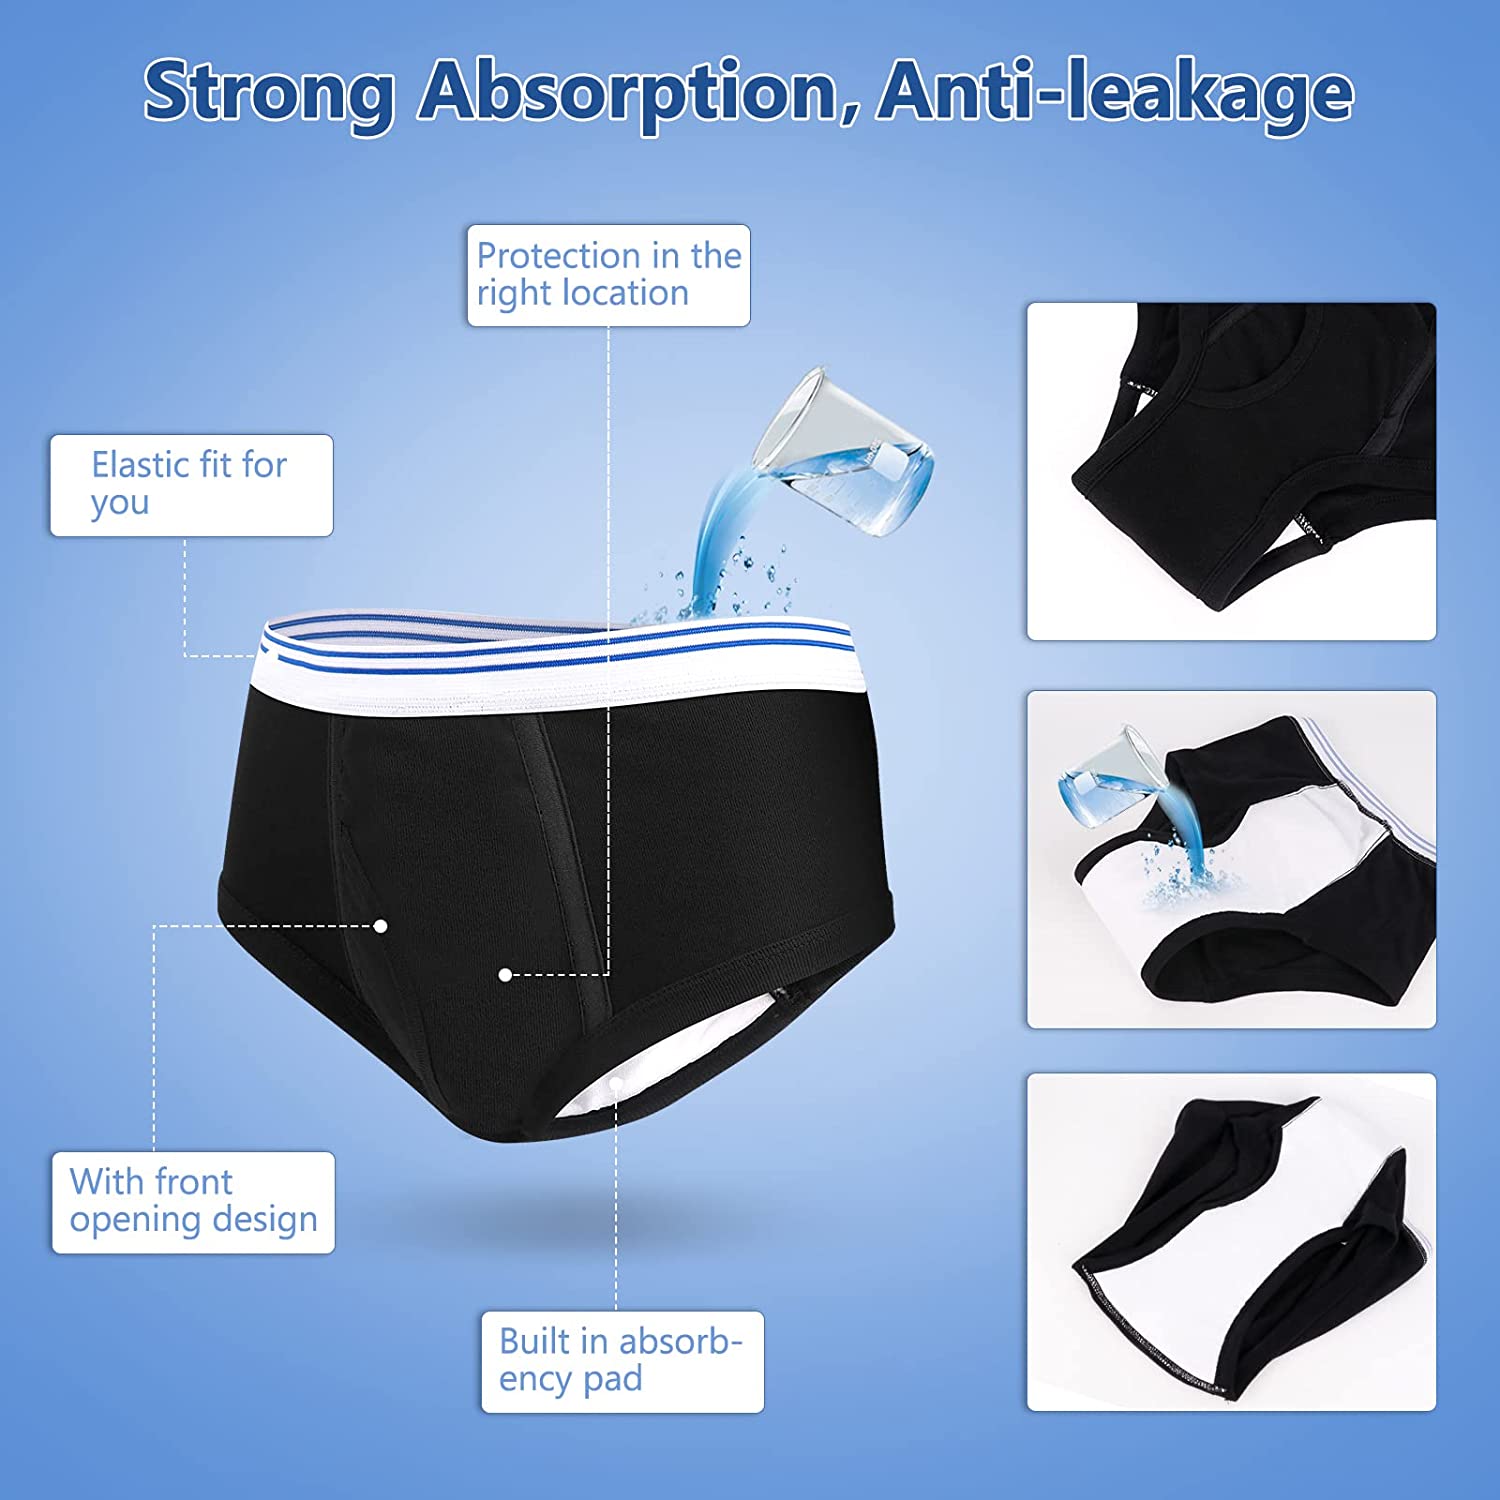 Petey's Washable Incontinence Underwear for Men, Moderate